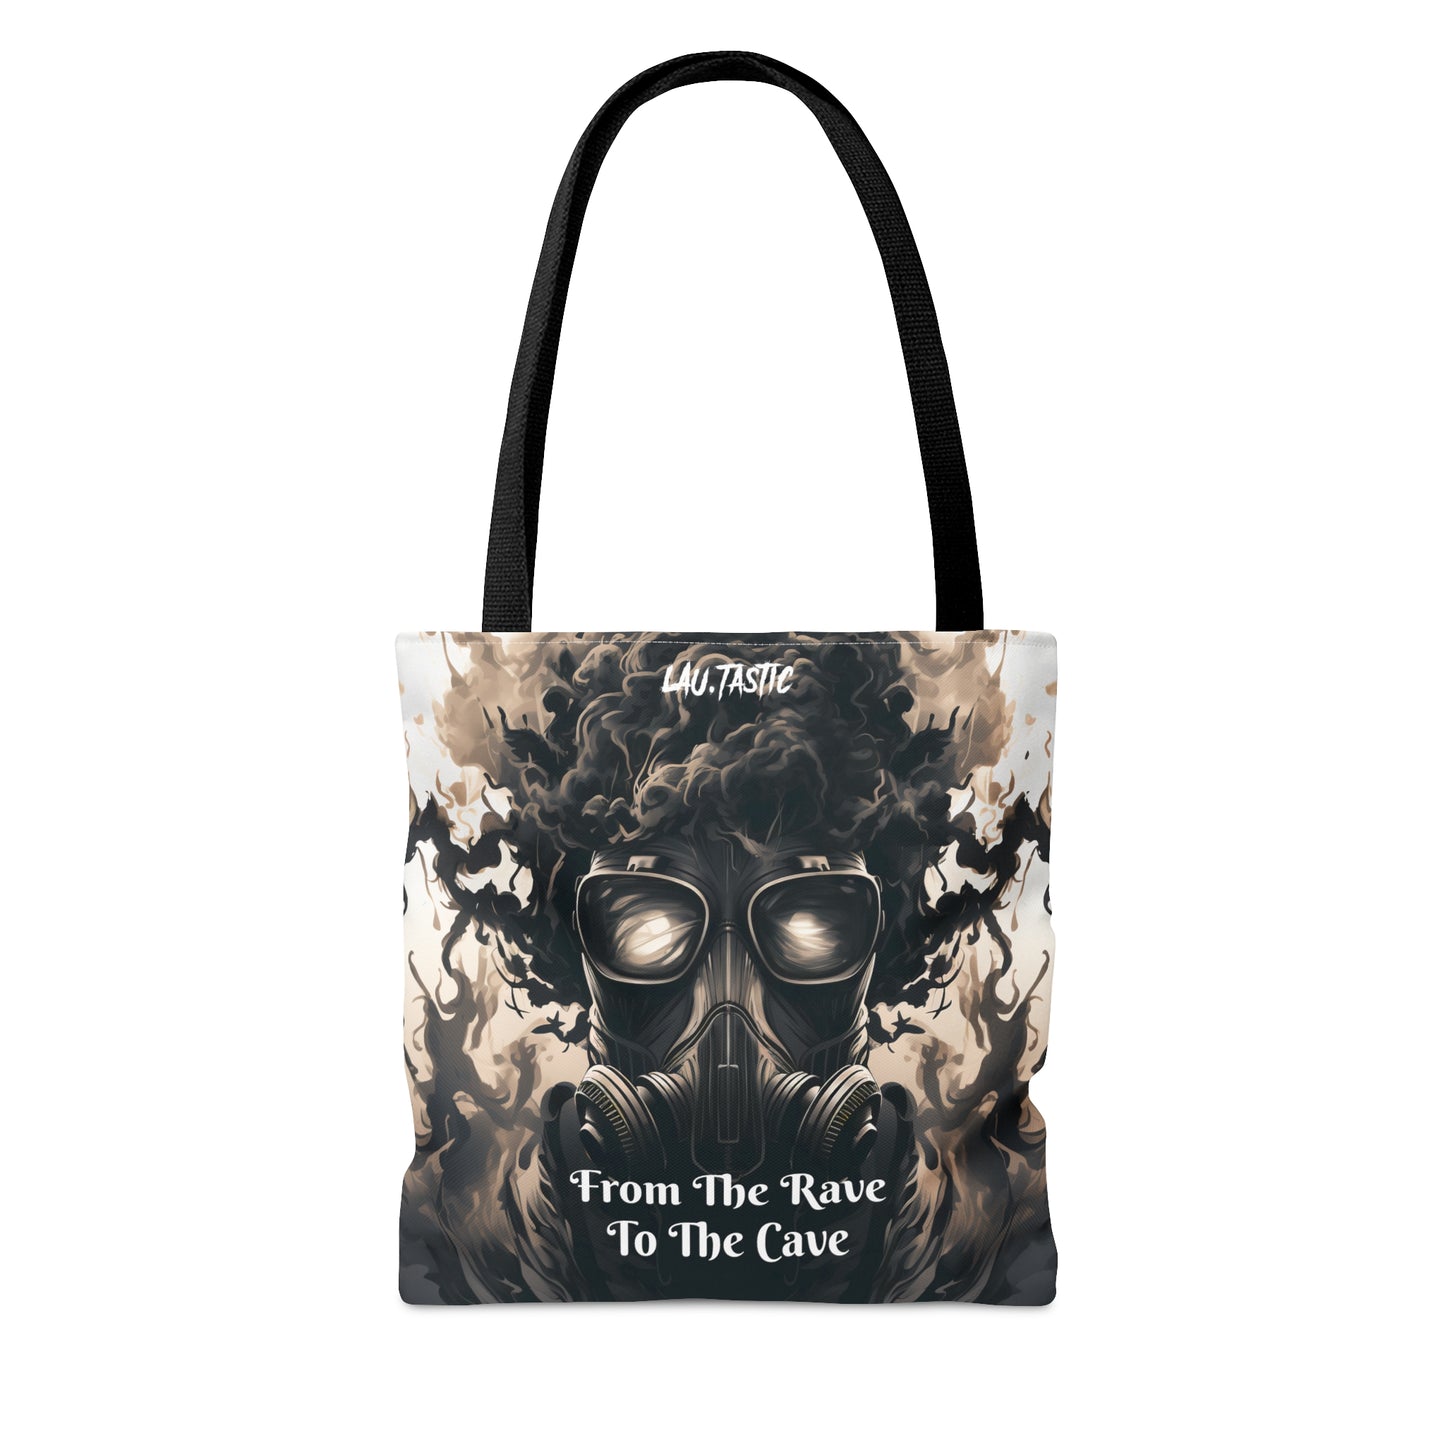 LAU.TASTIC | From The Rave To The Cave -  Tote Bag